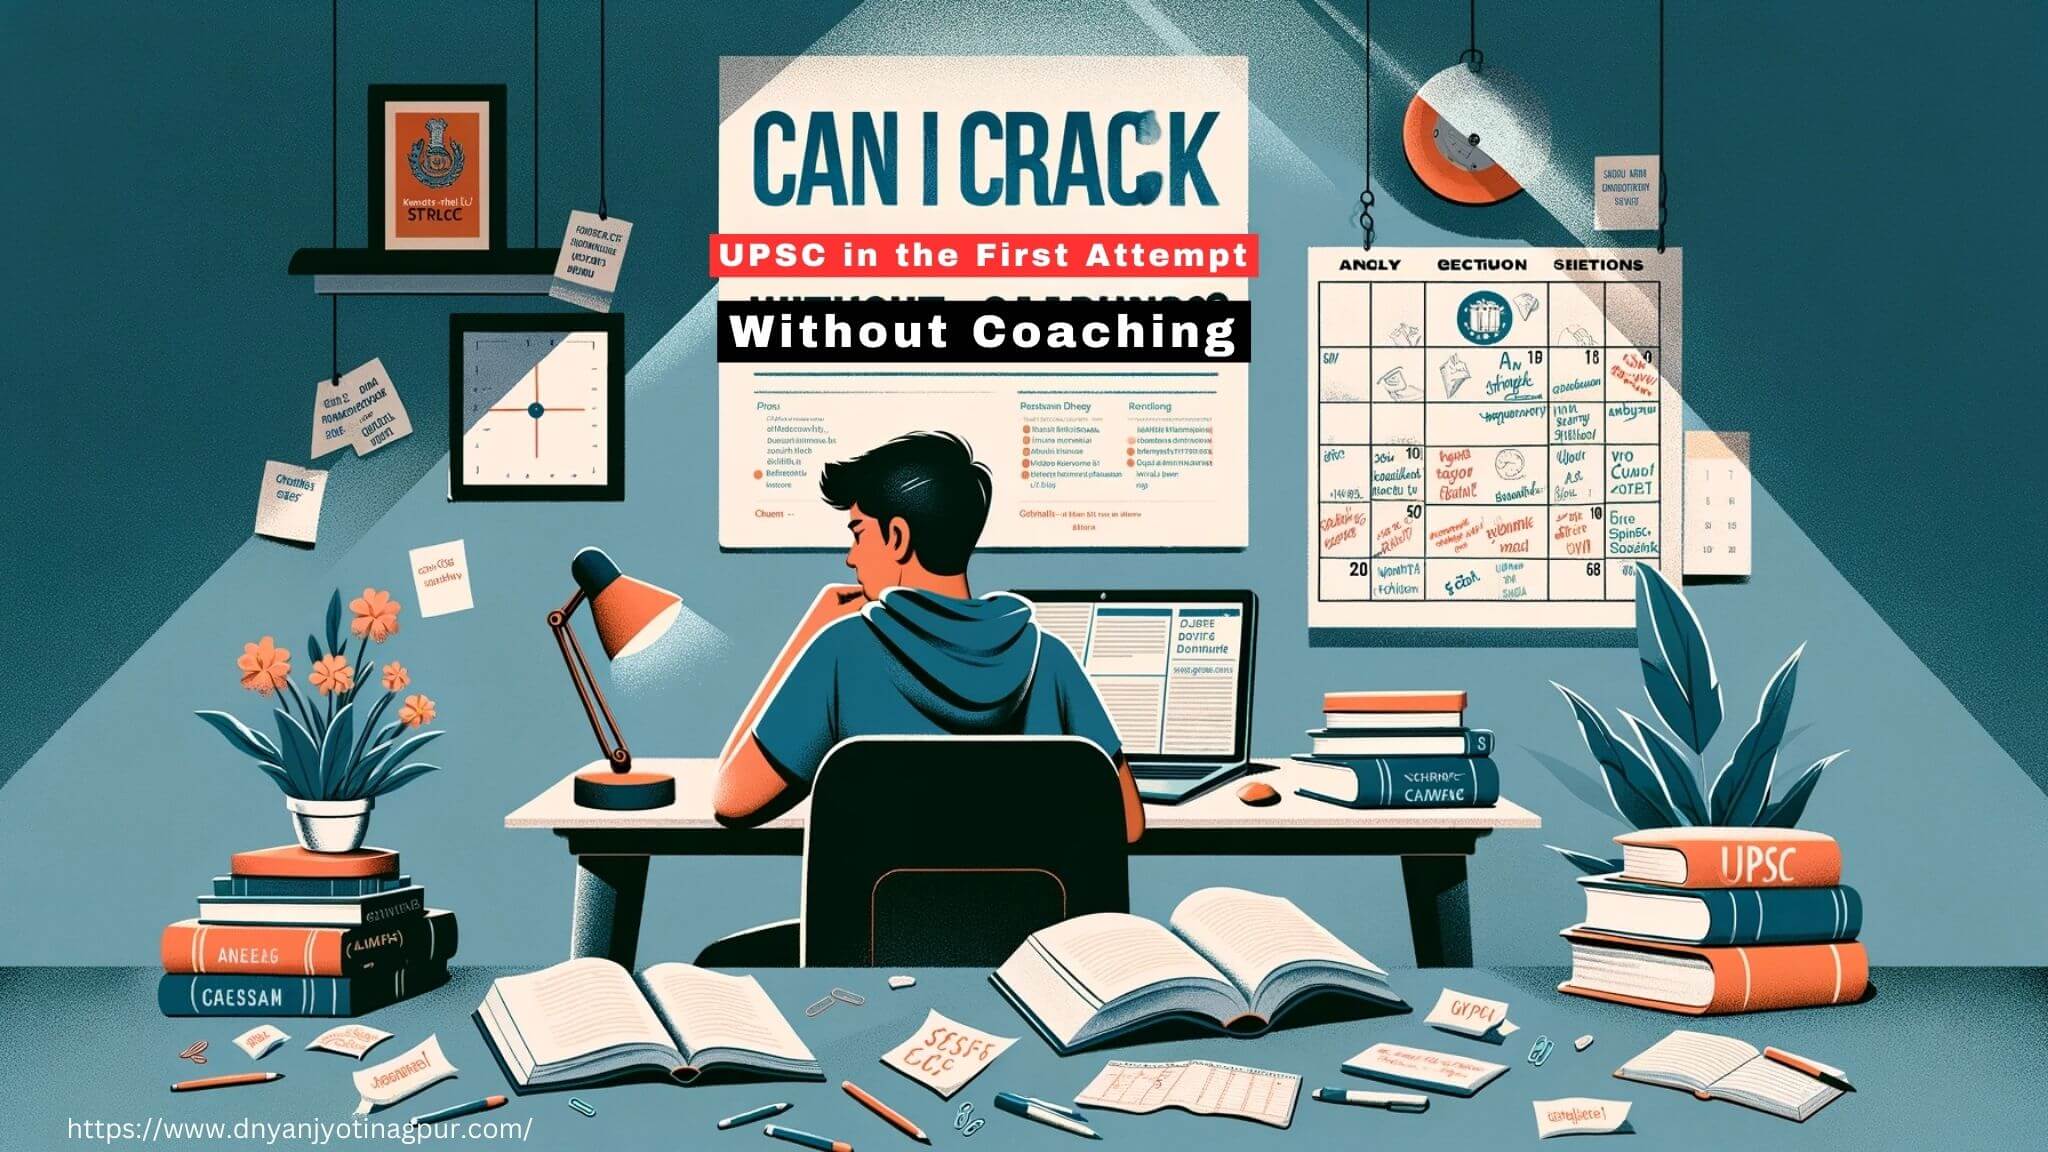 Can I Crack UPSC in the First Attempt Without Coaching